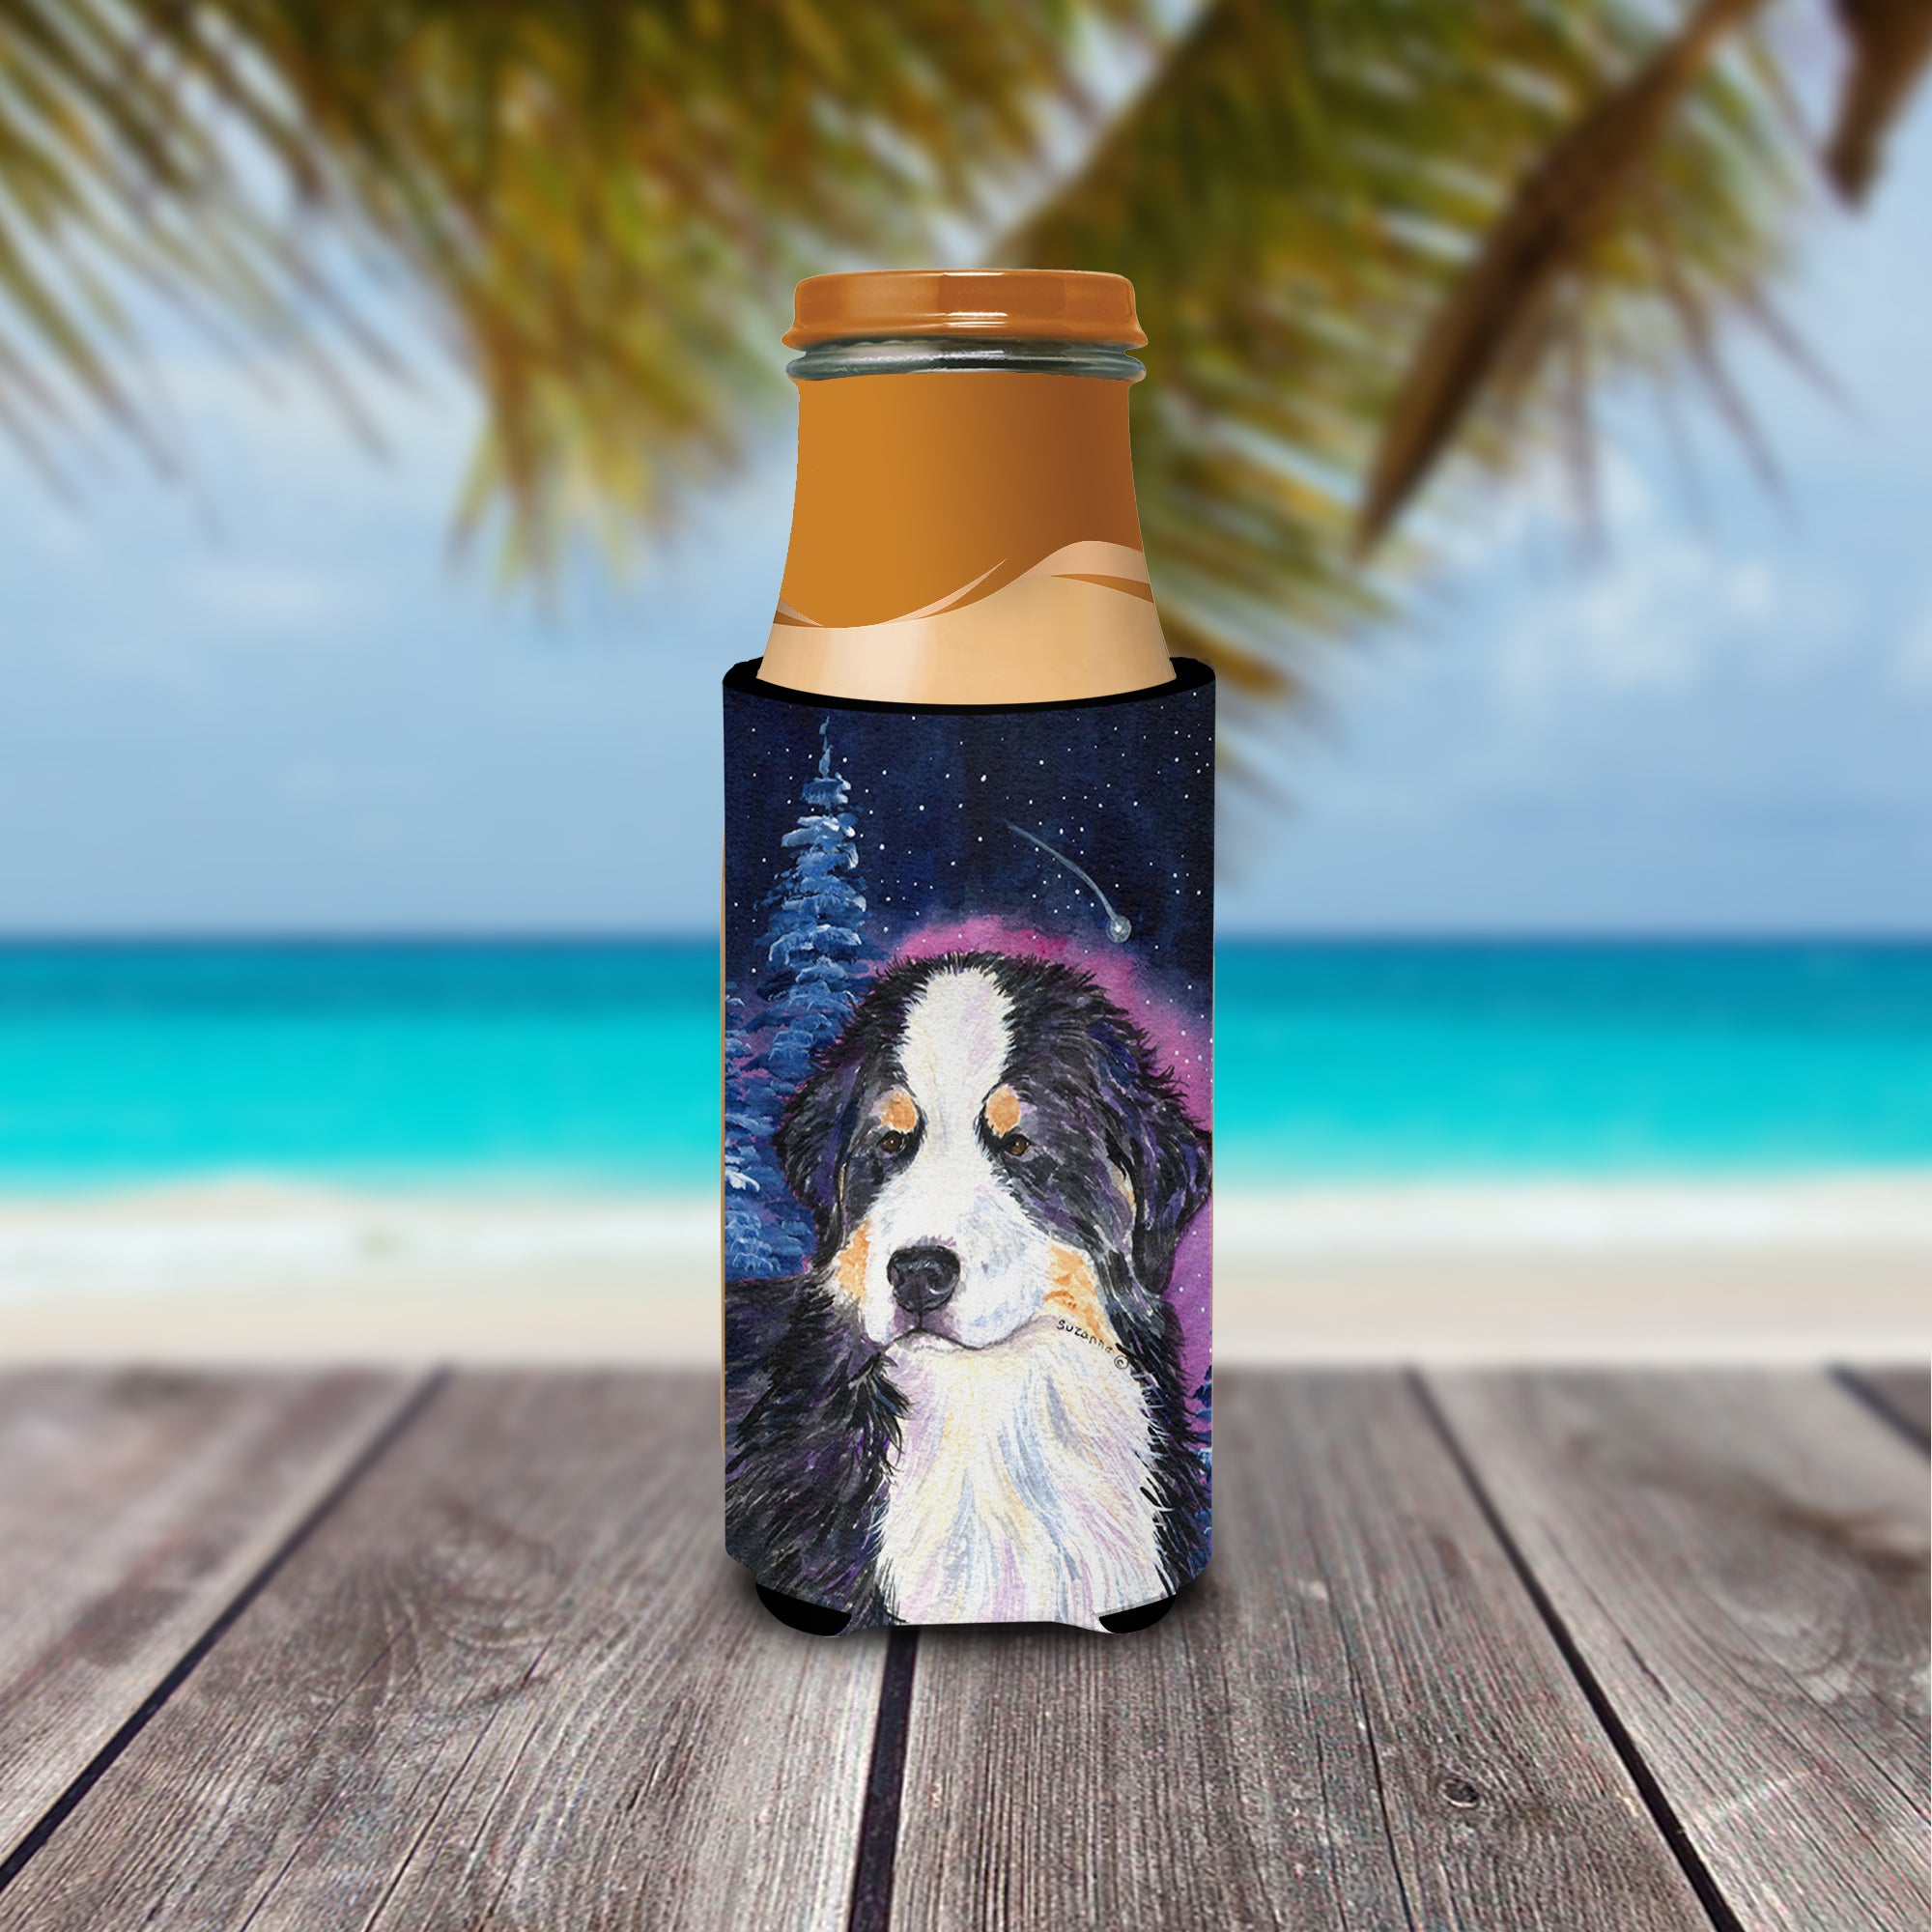 Starry Night Bernese Mountain Dog Ultra Beverage Insulators for slim cans SS8446MUK